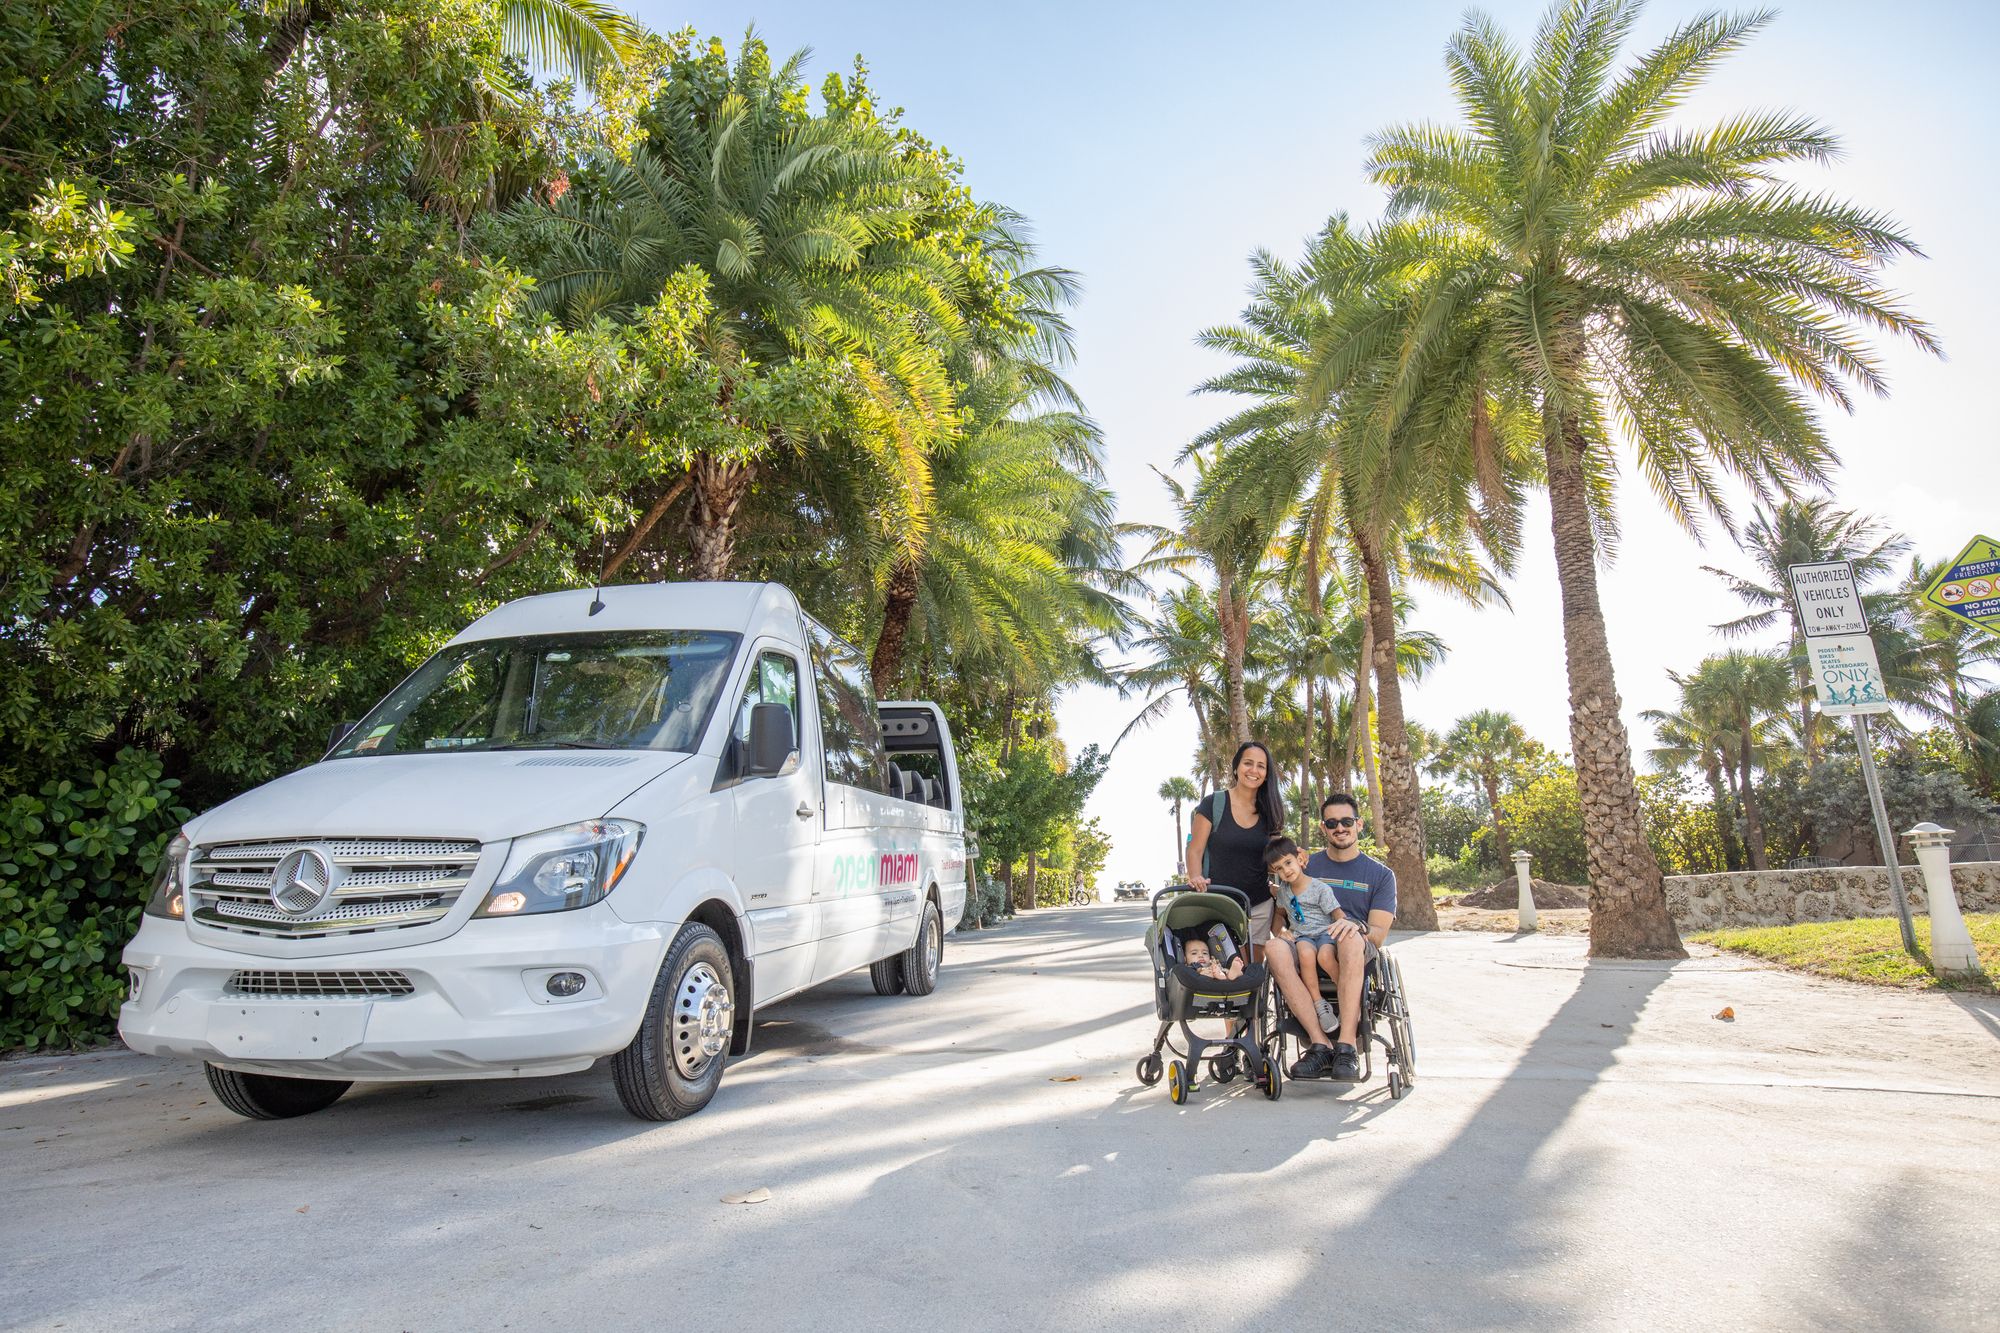 Accessible transportation for your trips can be organized by Wheel the World